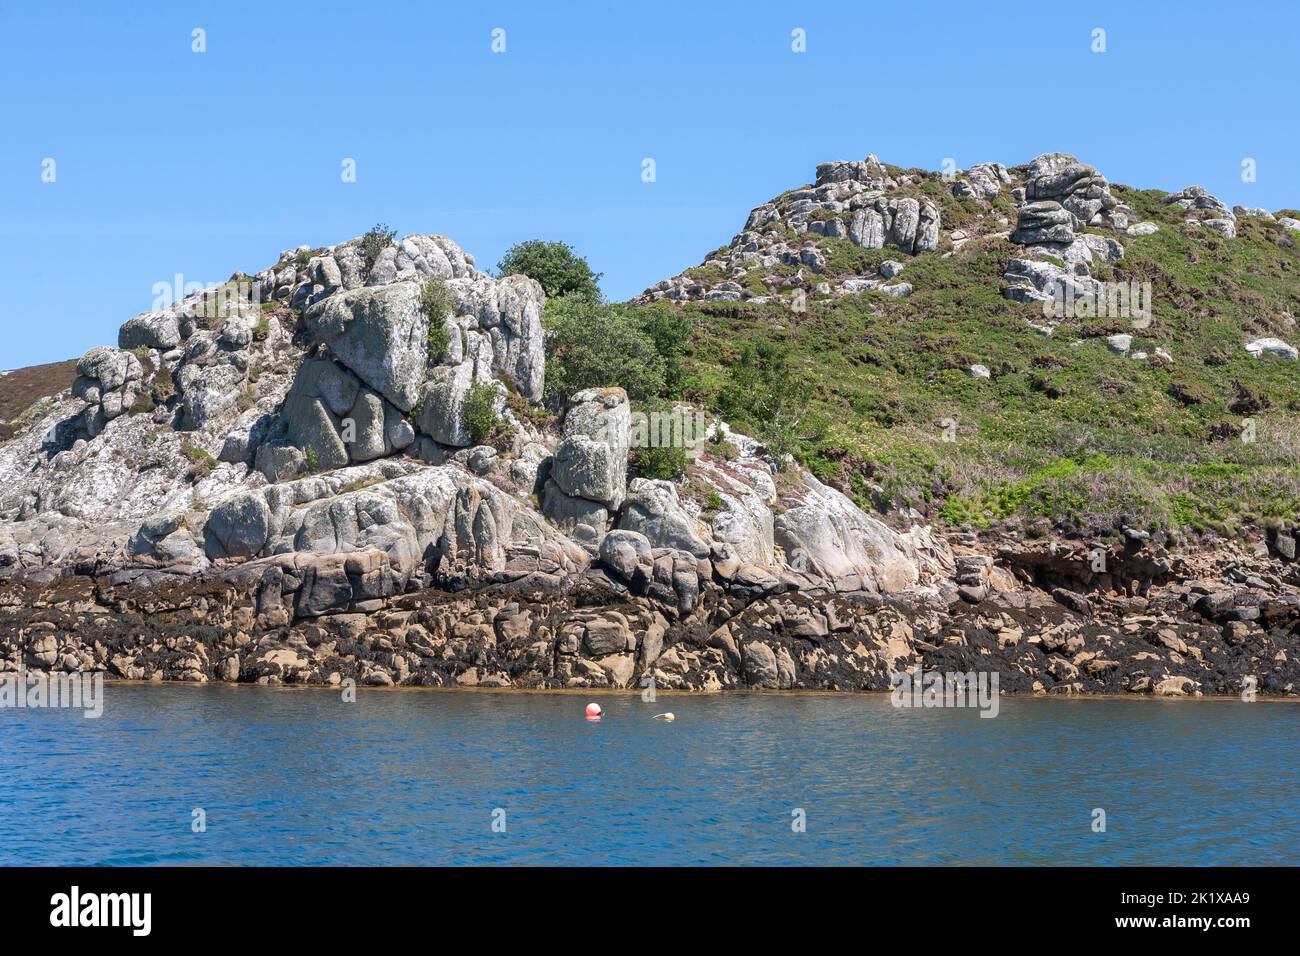 The coast of the island of Tresco from a yacht in New Grimsby Sound between Tresco and Bryher, Isles of Scilly, UK on a calm Summer's day. Stock Photo